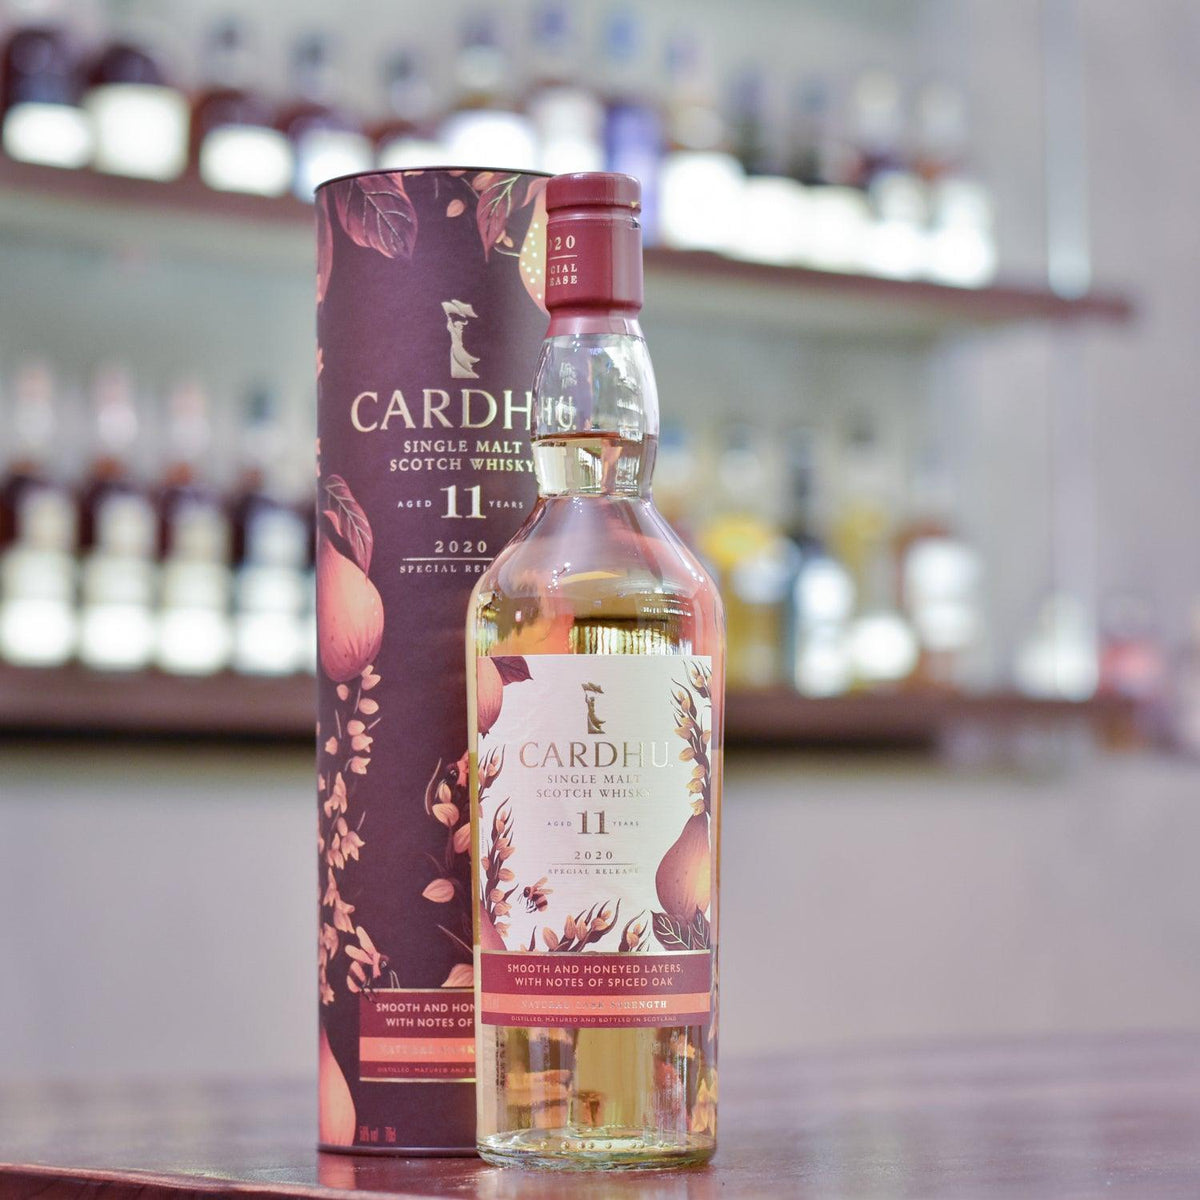 Cardhu 11 Year Old Cask Strength 2020 Special Release - The Rare Malt